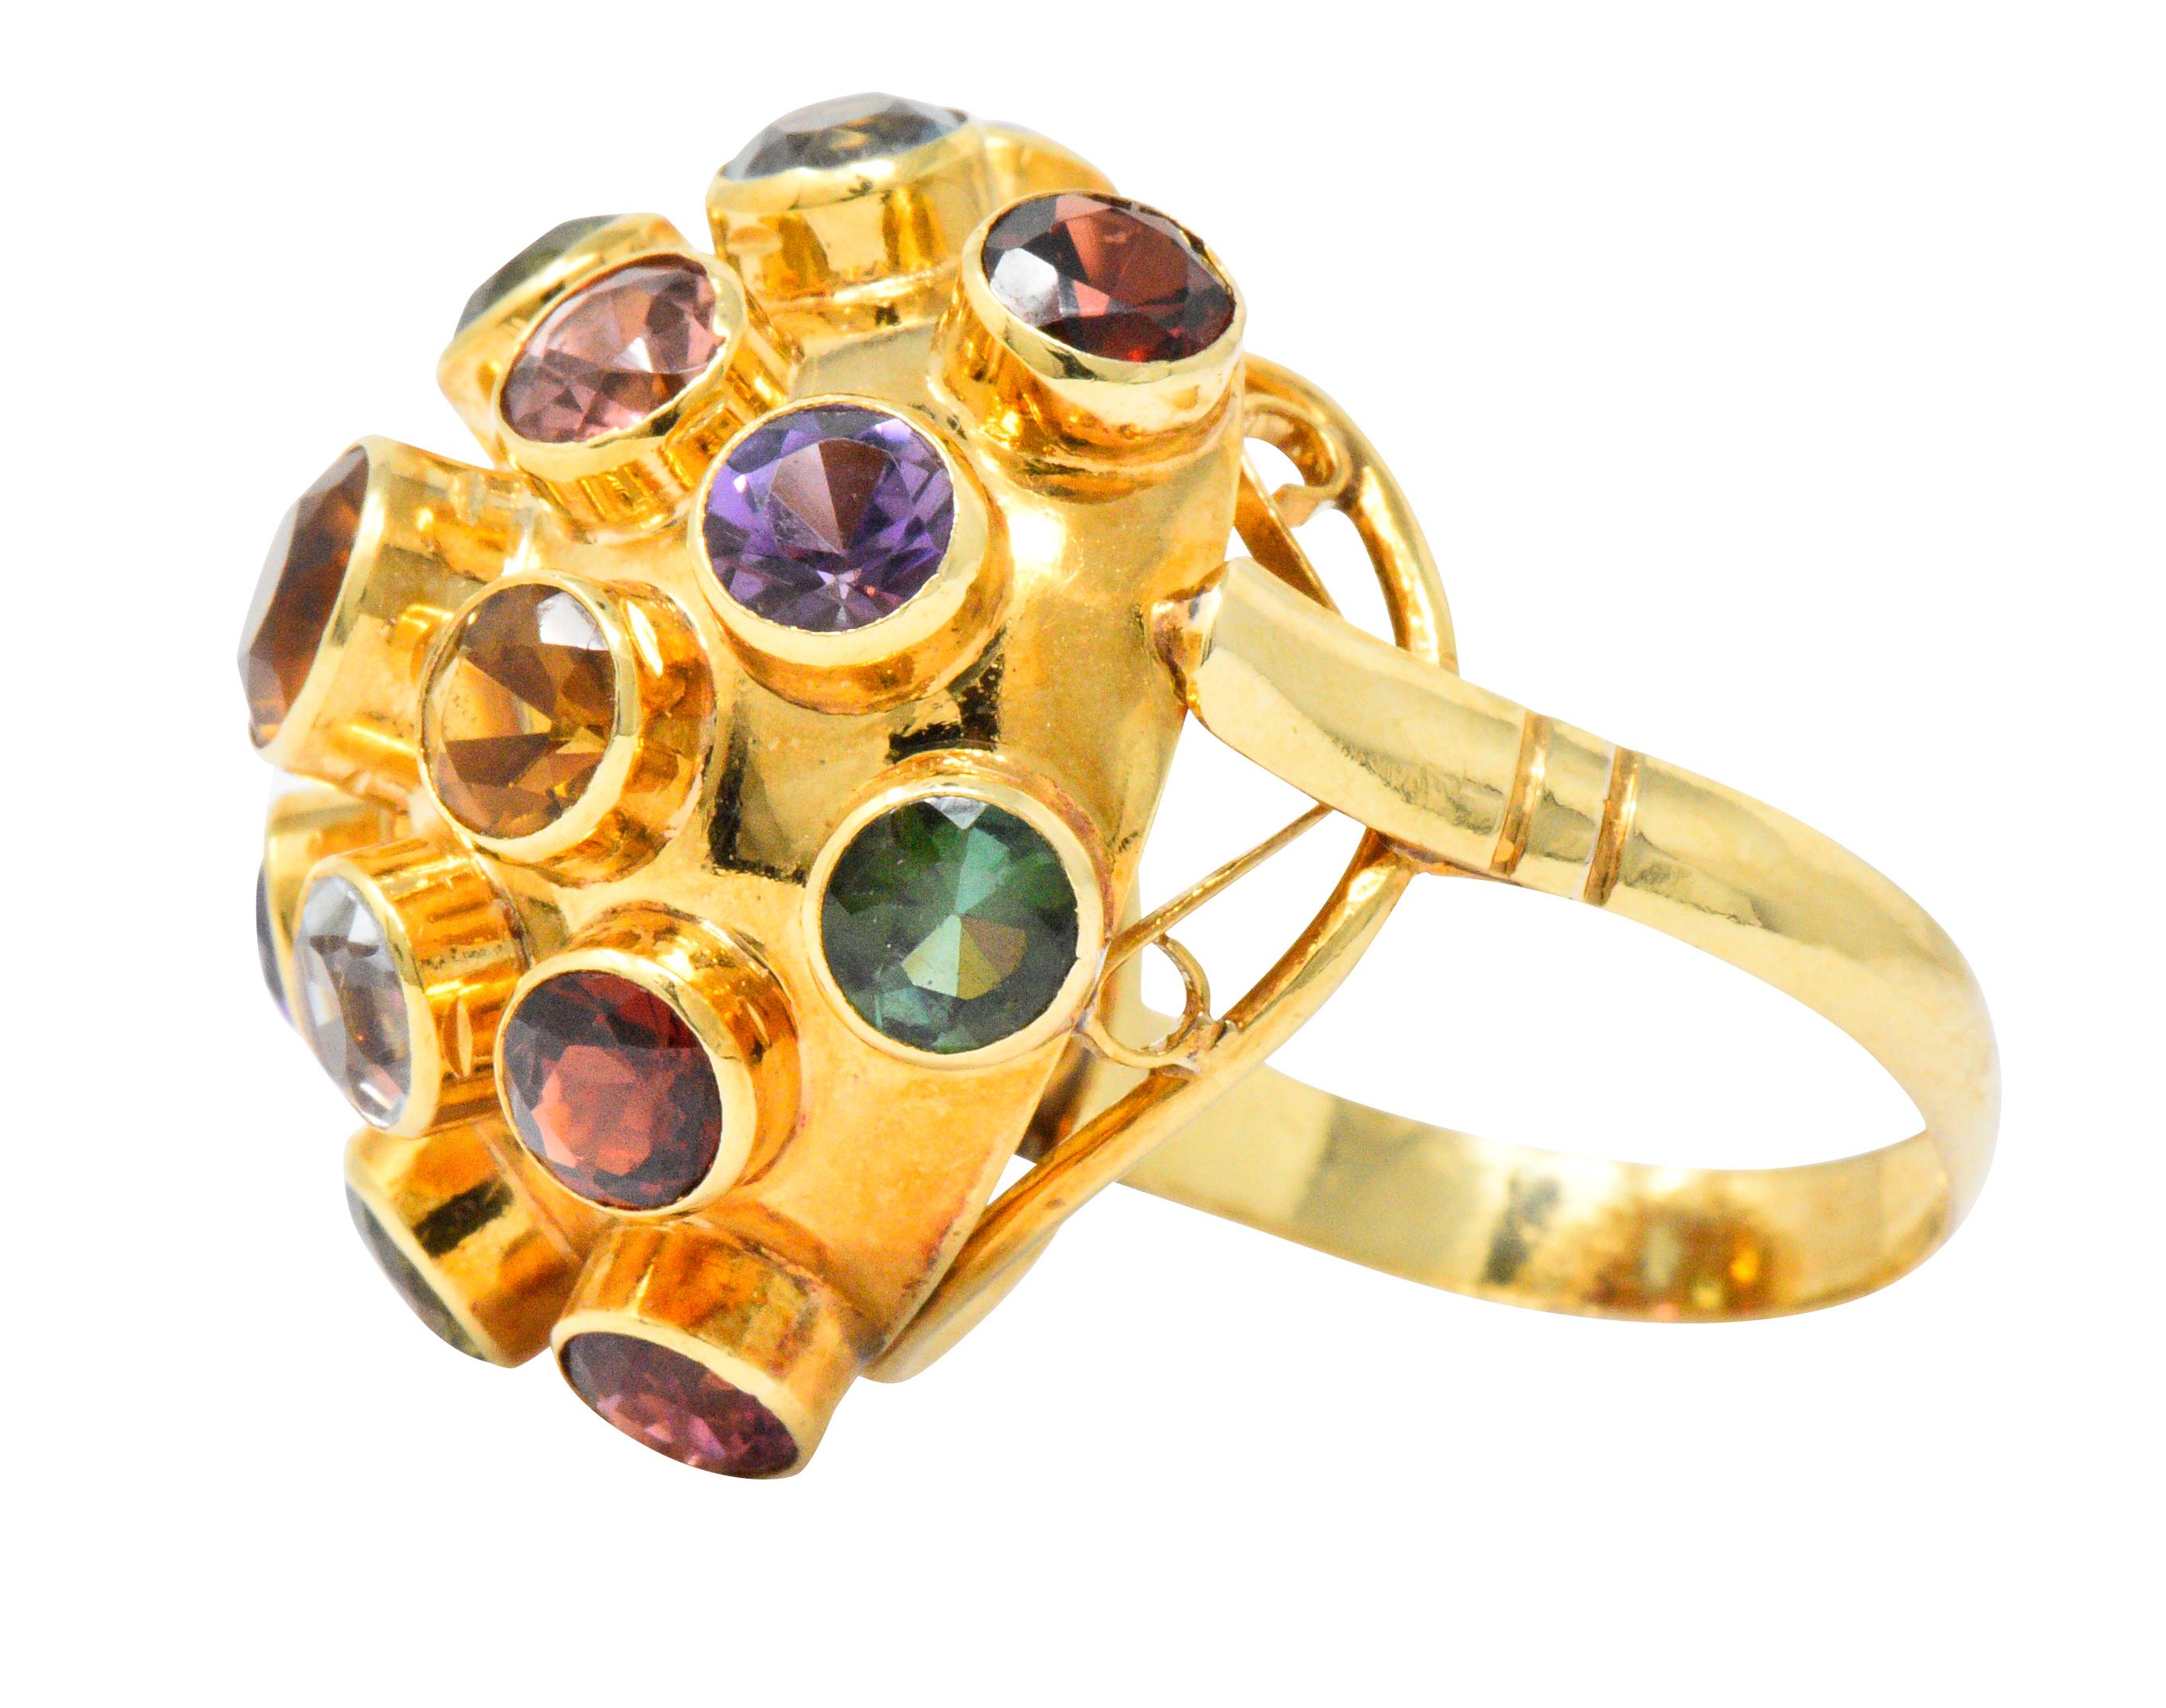 Bombé motif with round cut gemstones, including citrine, aquamarine, garnet, amethyst and more

All bezel set and of varying heights 

Inspired by the first man-made satellite Sputnik 

Ring Size: 6 1/2 & Sizable

Top measures 24.5 mm and sits 14.5